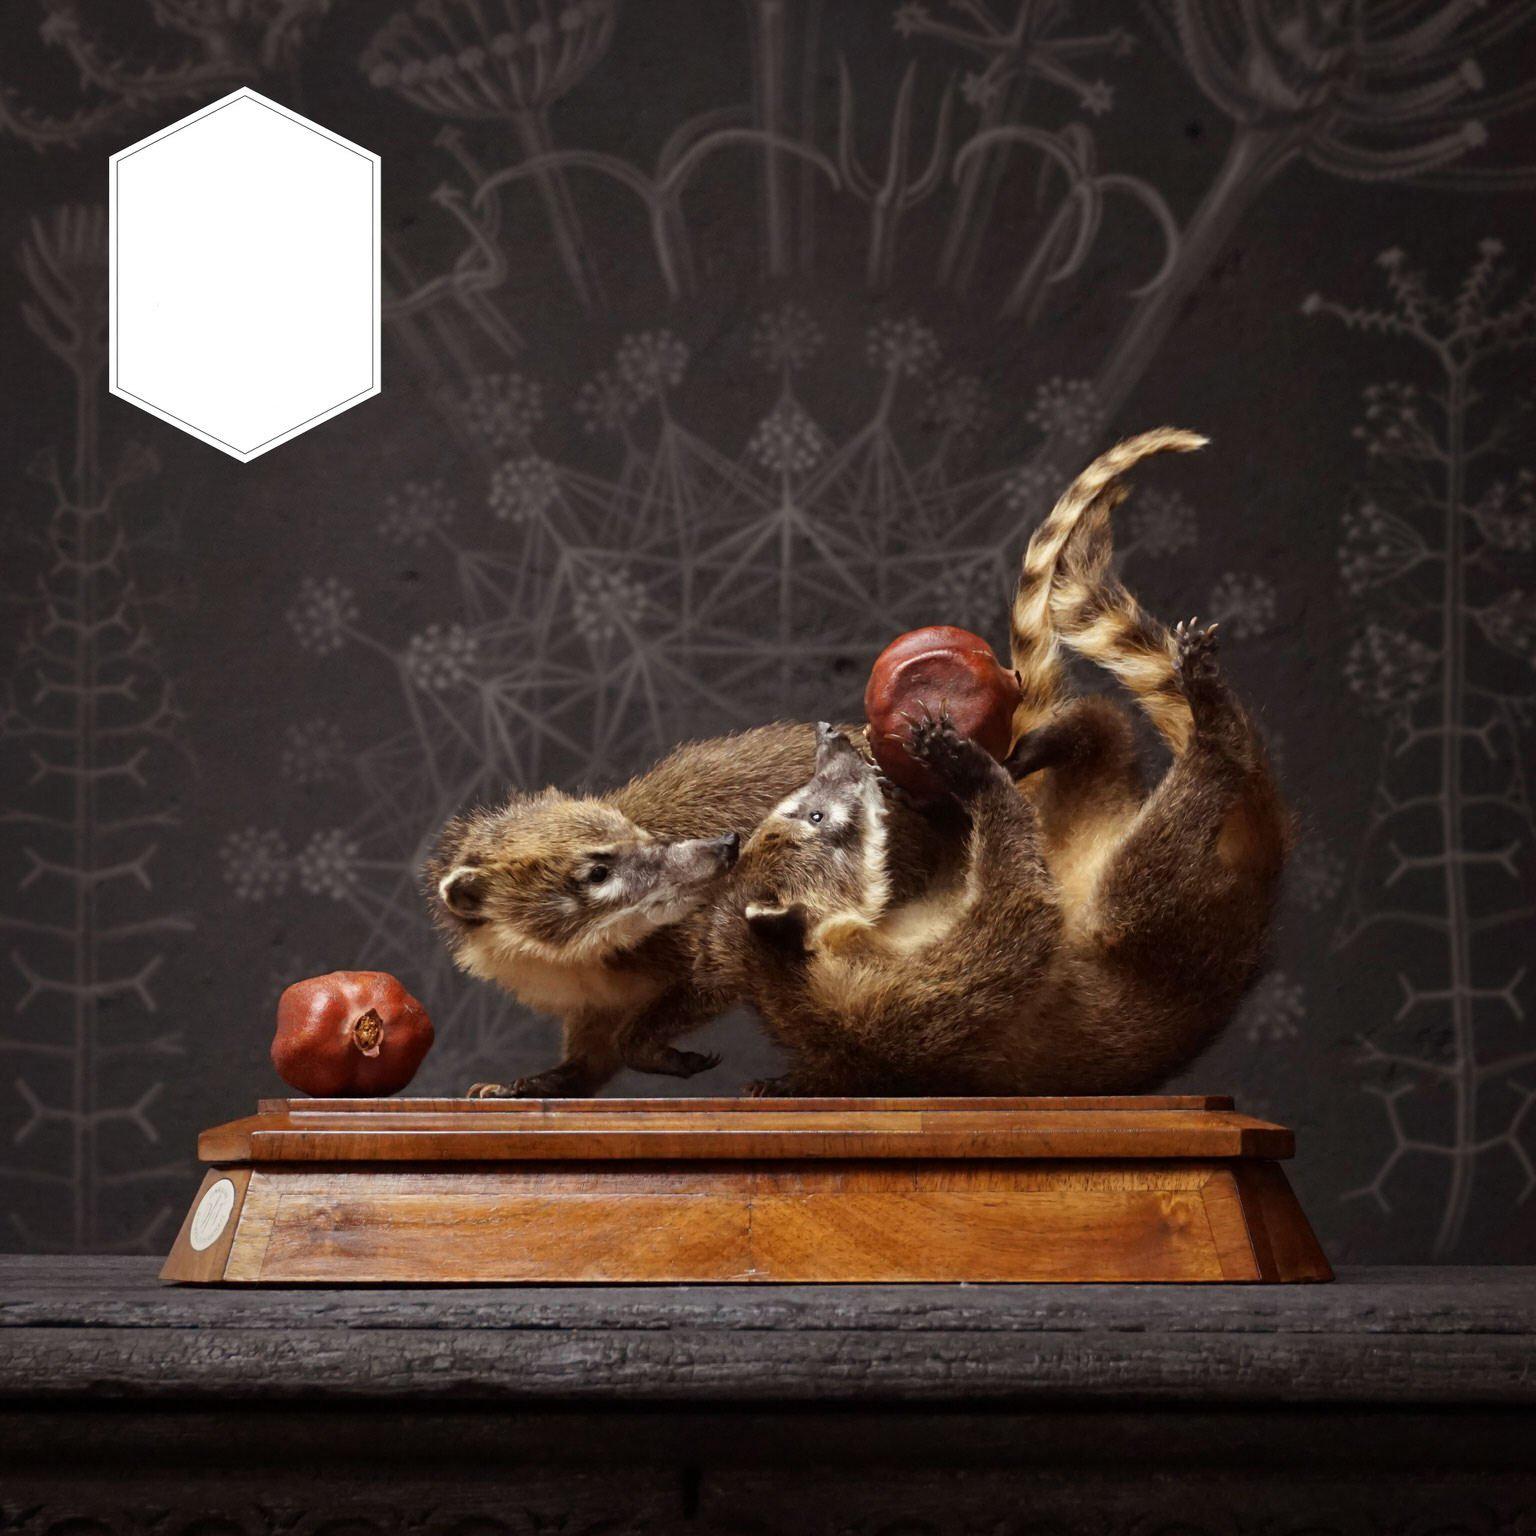 A cute artwork with two young Ring-tailed Coatis (Nasua nasua) playing with a piece of fruit. Set on a wooden plinth.

This object is currently on display at JAMB, Pimlico Rd, London.

Note: None of our animals have been taken from the wild. All